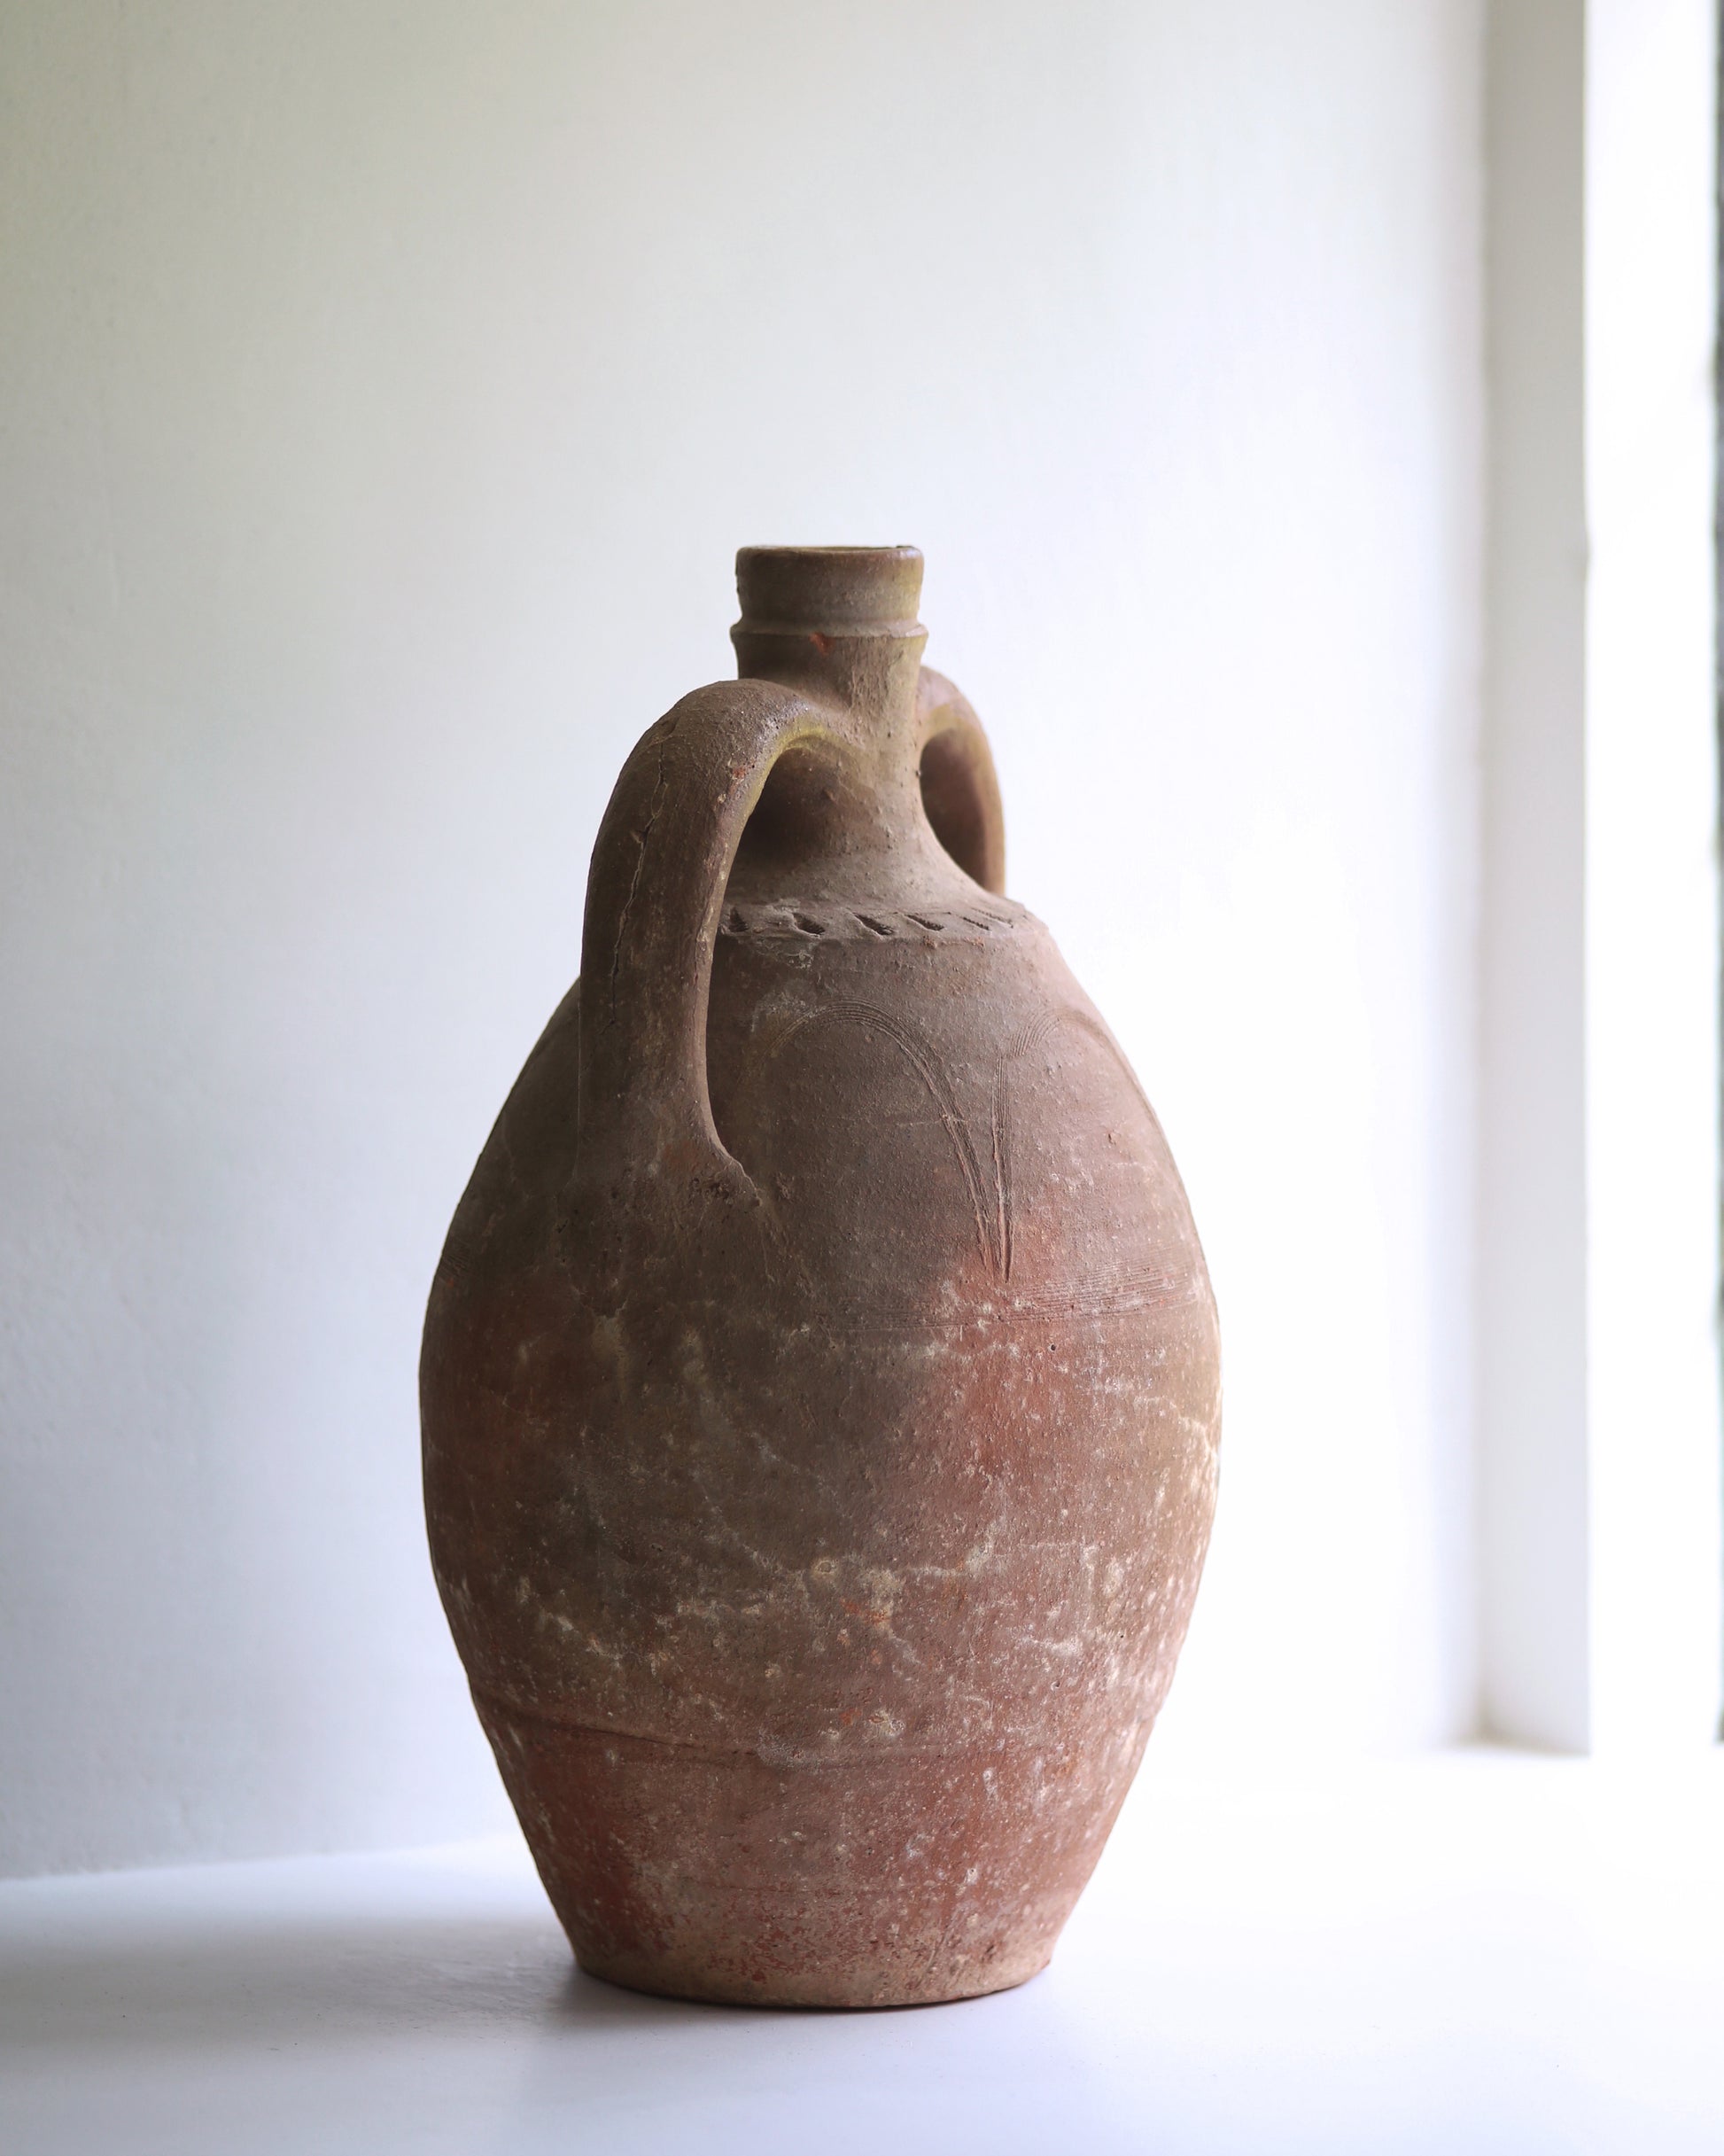 Side of large handled amphora in window sill showing deep hand-carved decorative details